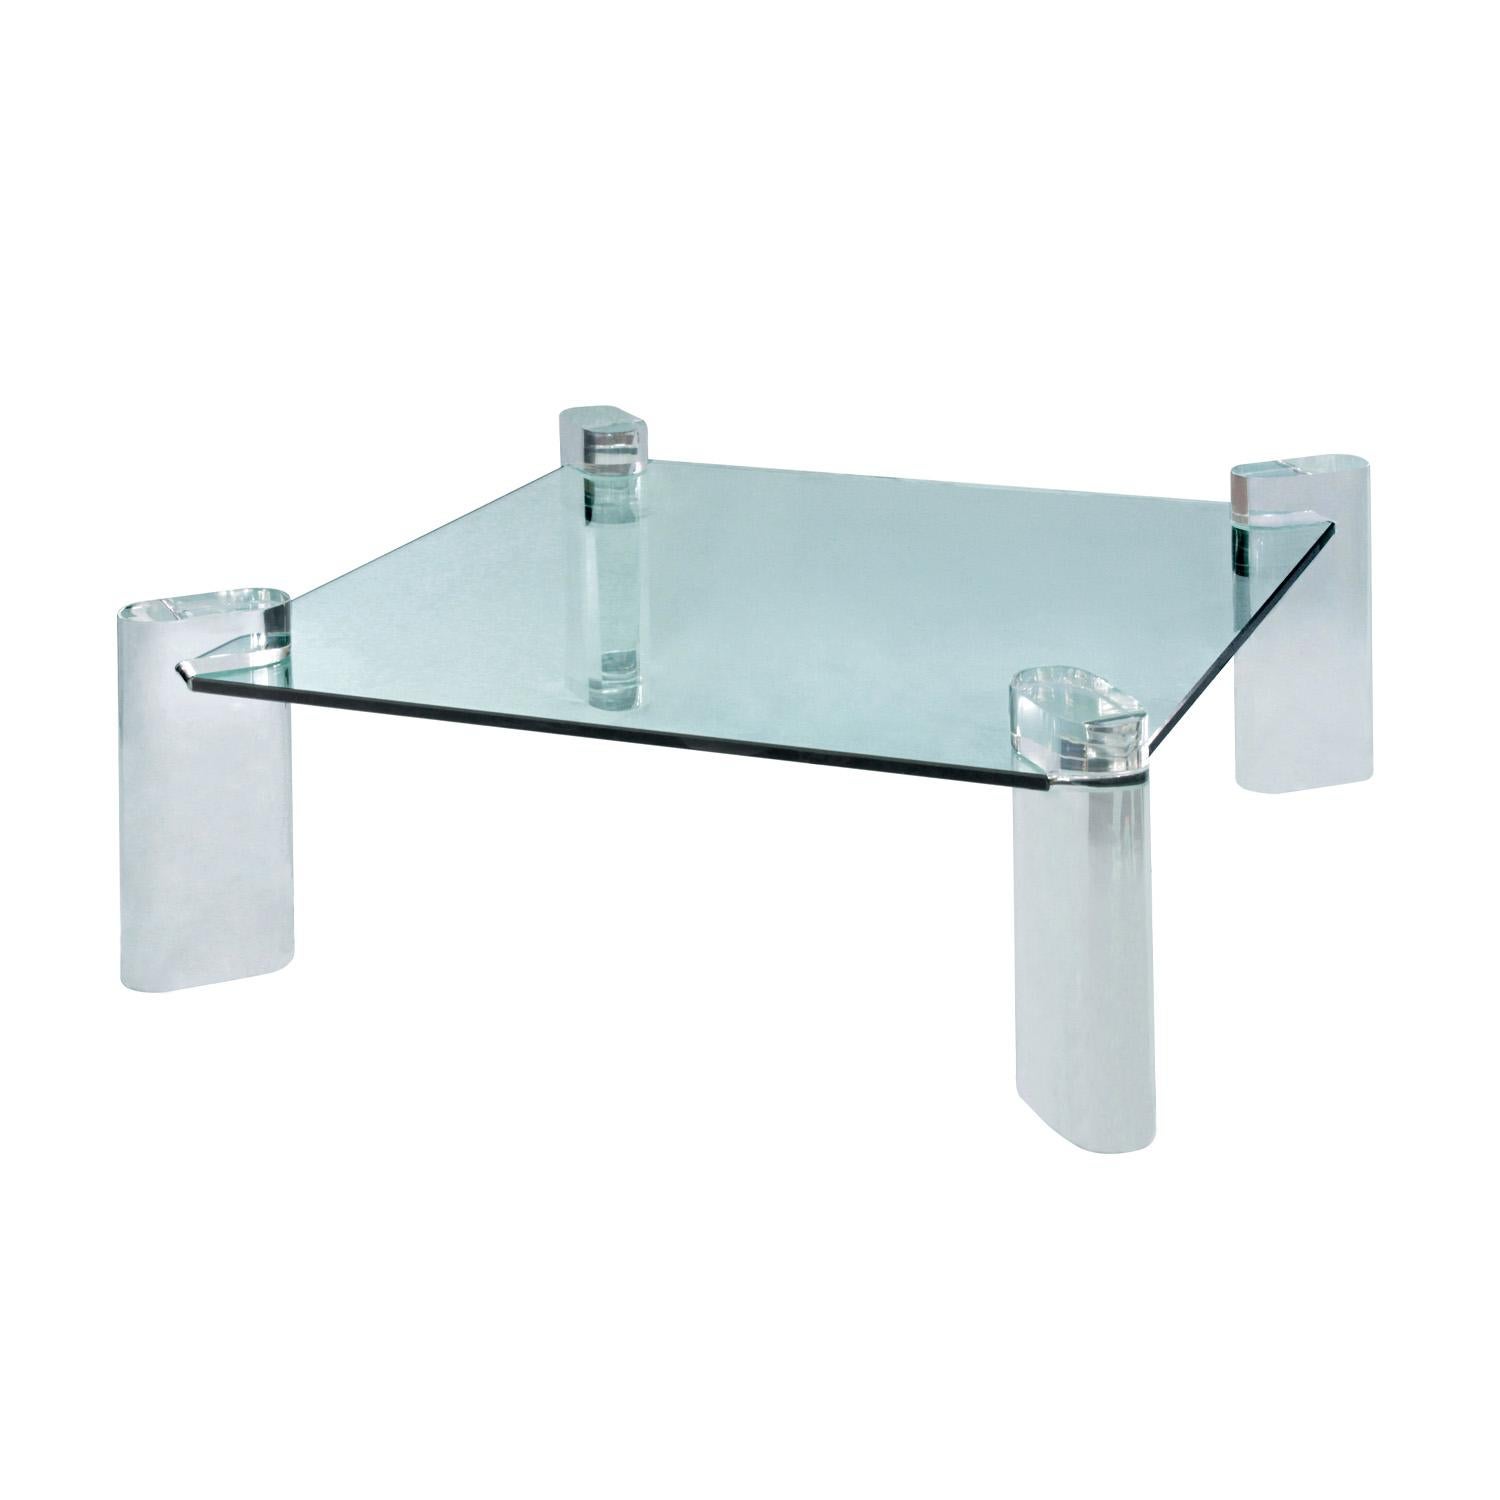 “Lucite Leg Coffee Table” with beautifully made solid lucite legs and thick glass top by Karl Springer, American 1980's. This can be configured with legs at the corners or one on each side or 2 on 2 sides. Also, the size can be customized with any